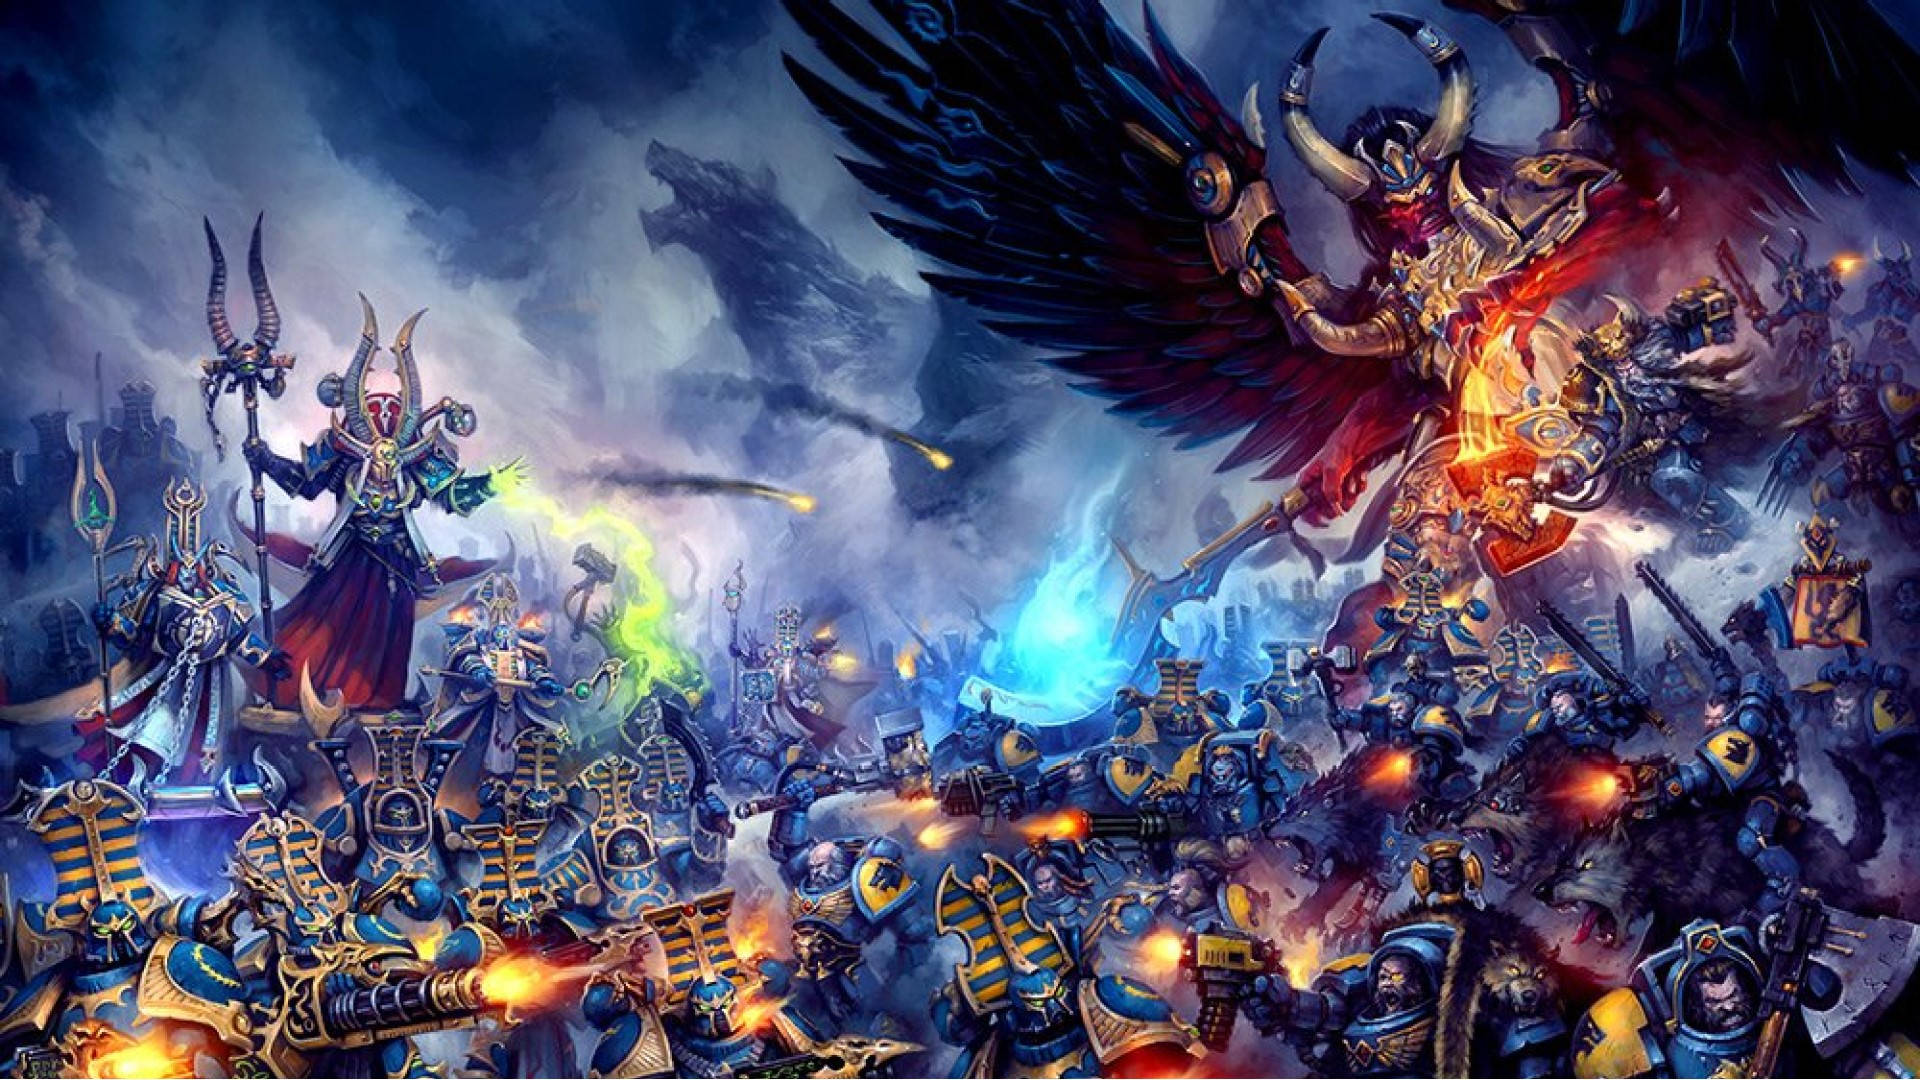 Warhammer 40k Thousand Sons Chaos Space Marines Background